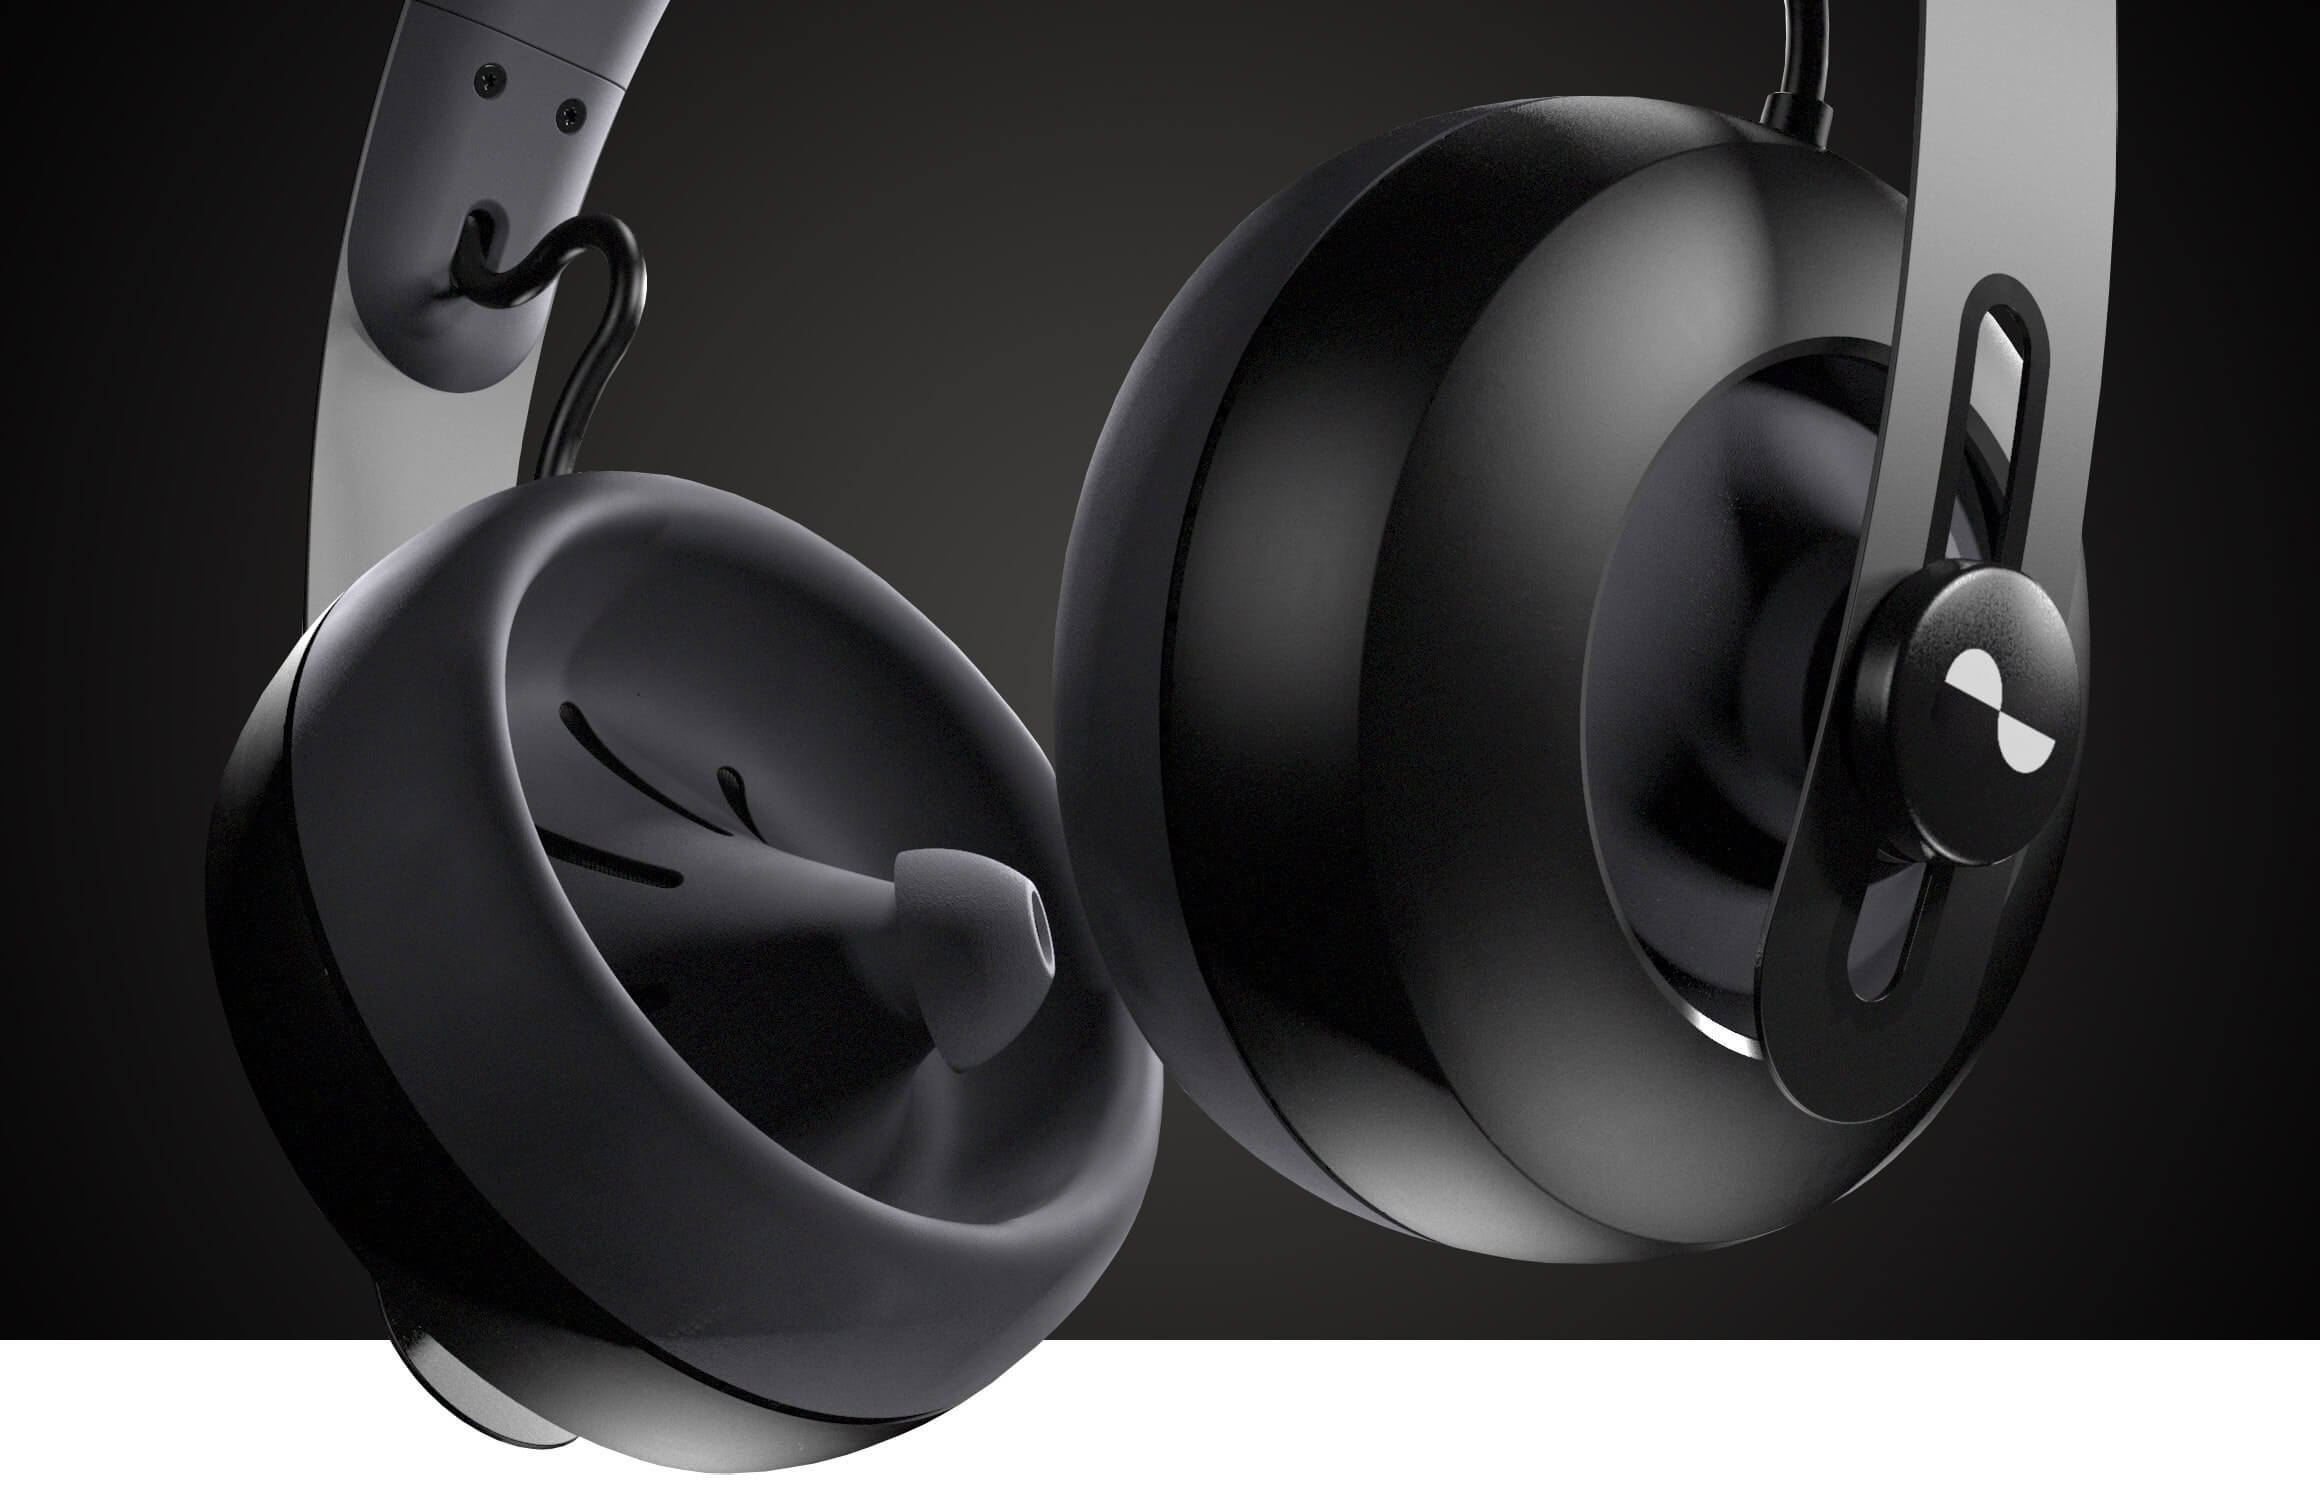 Nura launches subscription service so people can rent its headphones